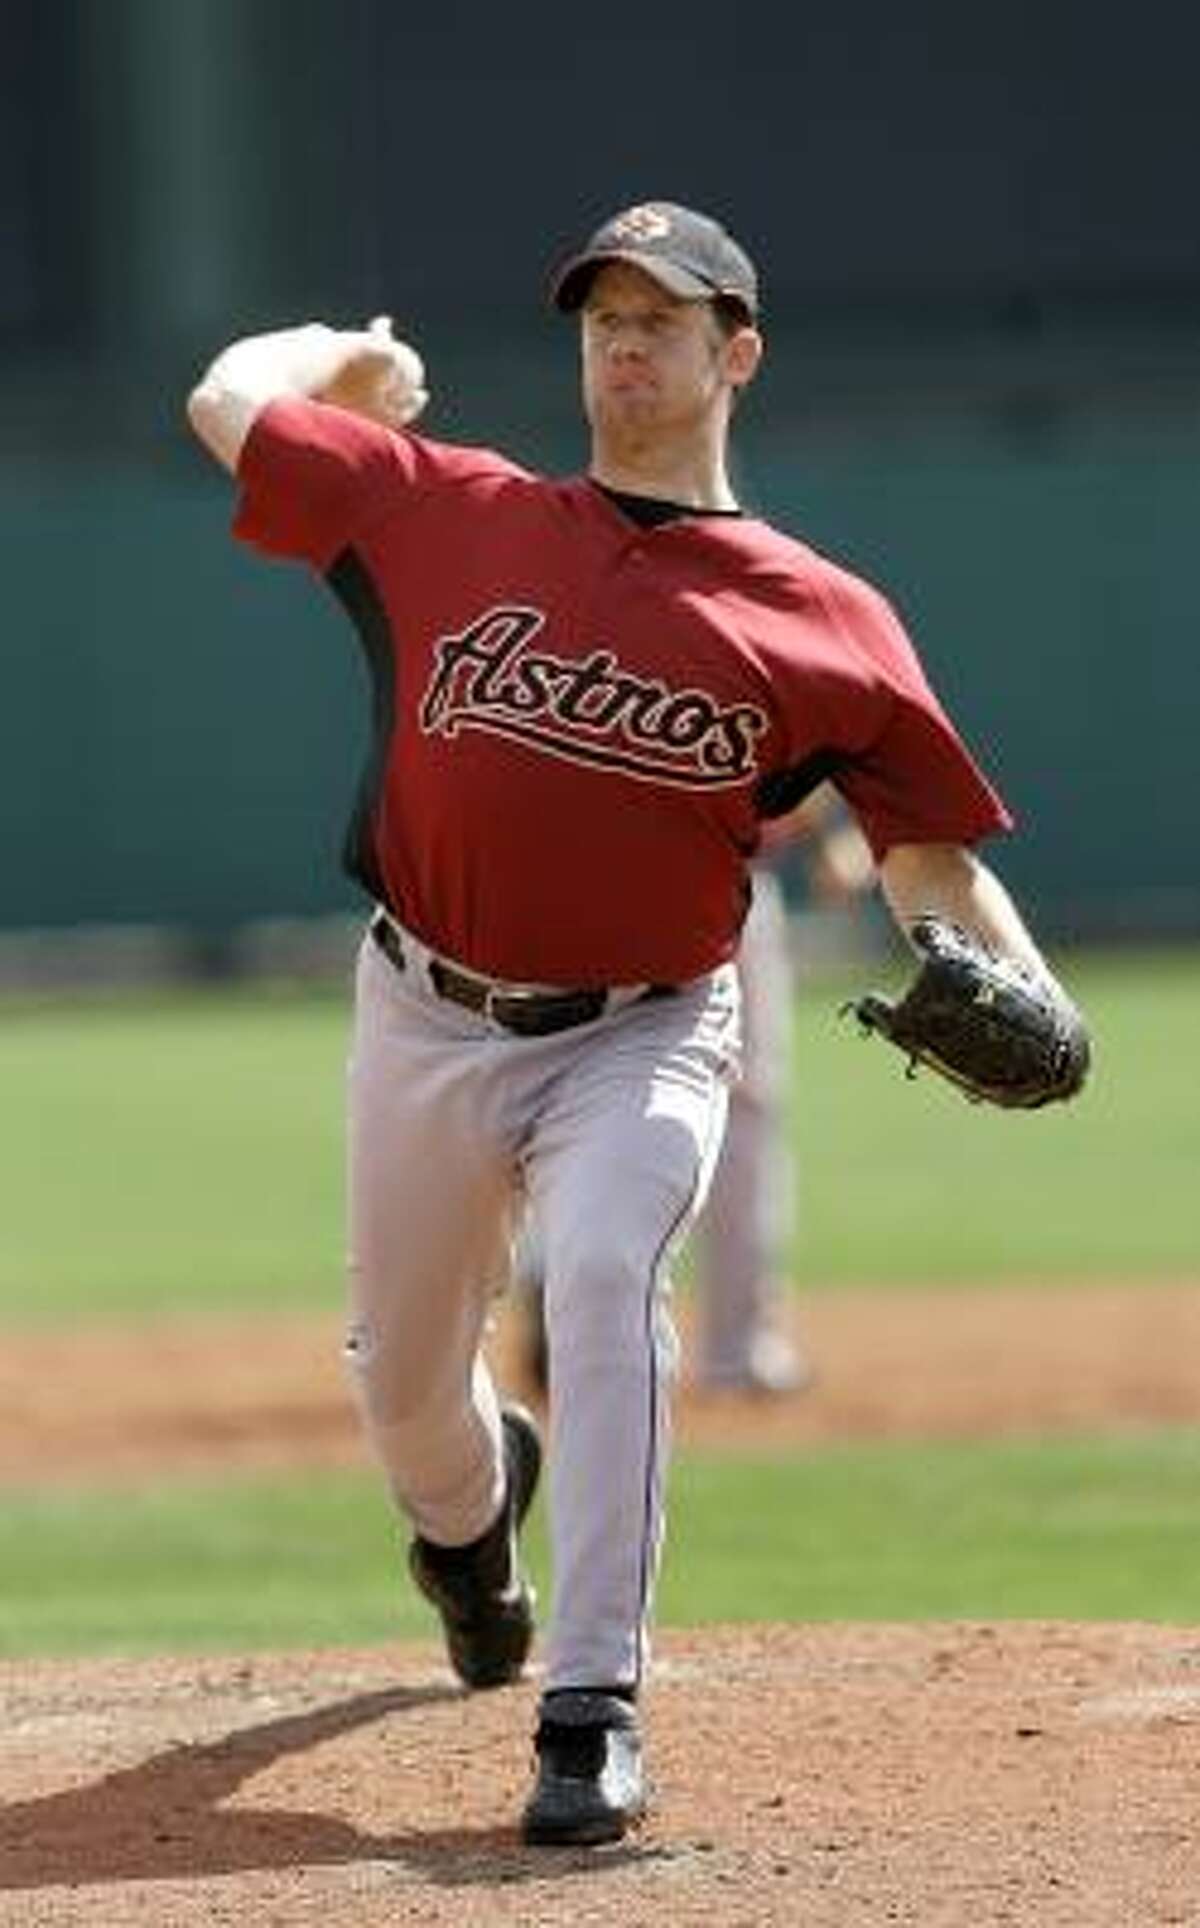 Roy Oswalt won't pitch again for the Astros until after the World Baseball Classic.